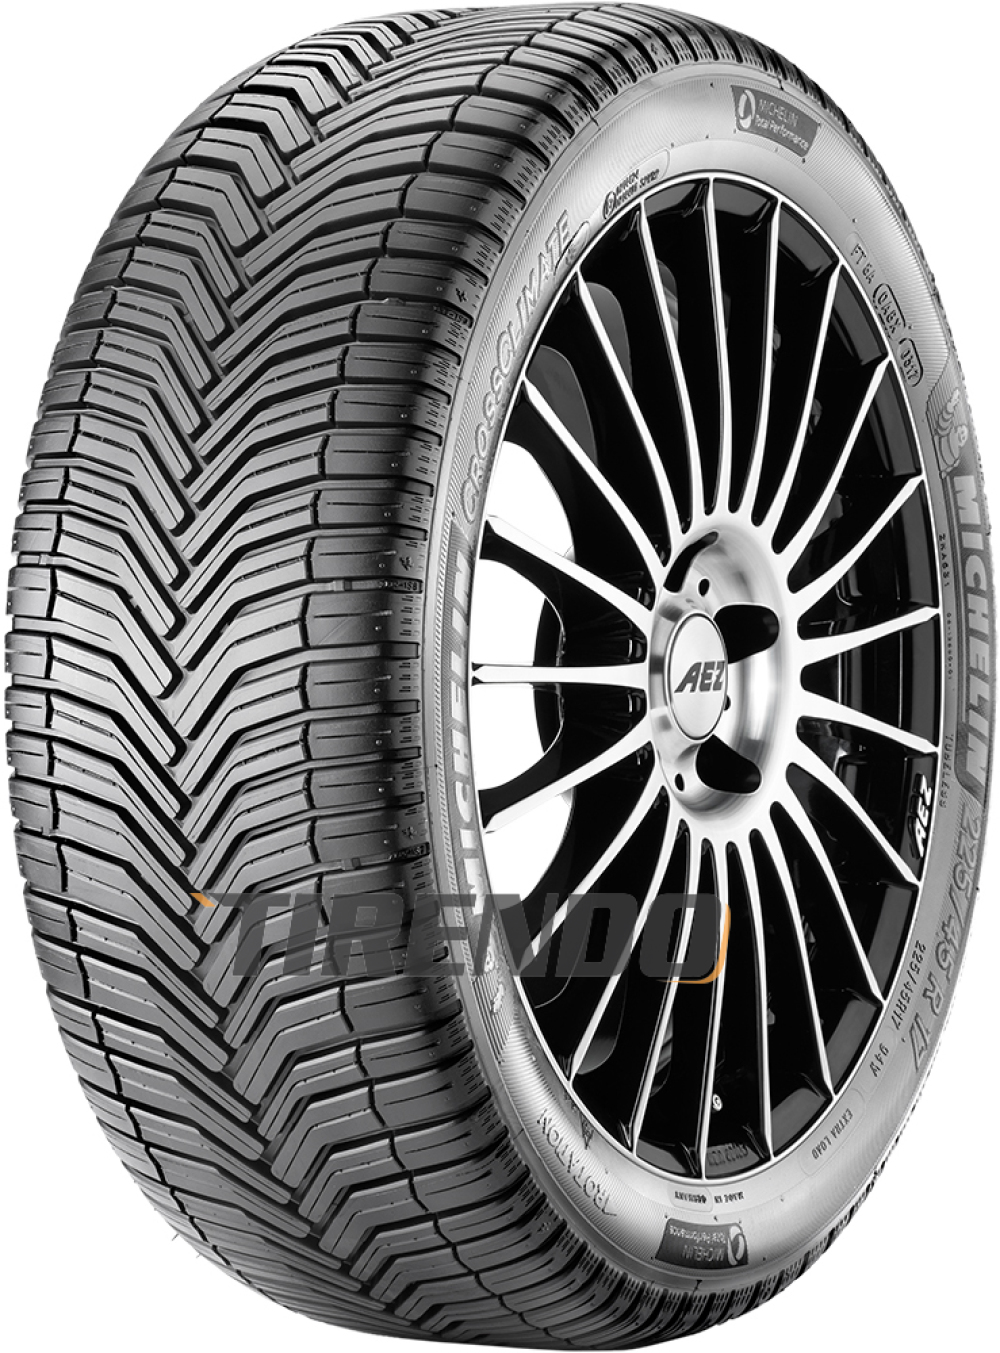 Image of Michelin CrossClimate + ( 165/65 R14 83T XL )